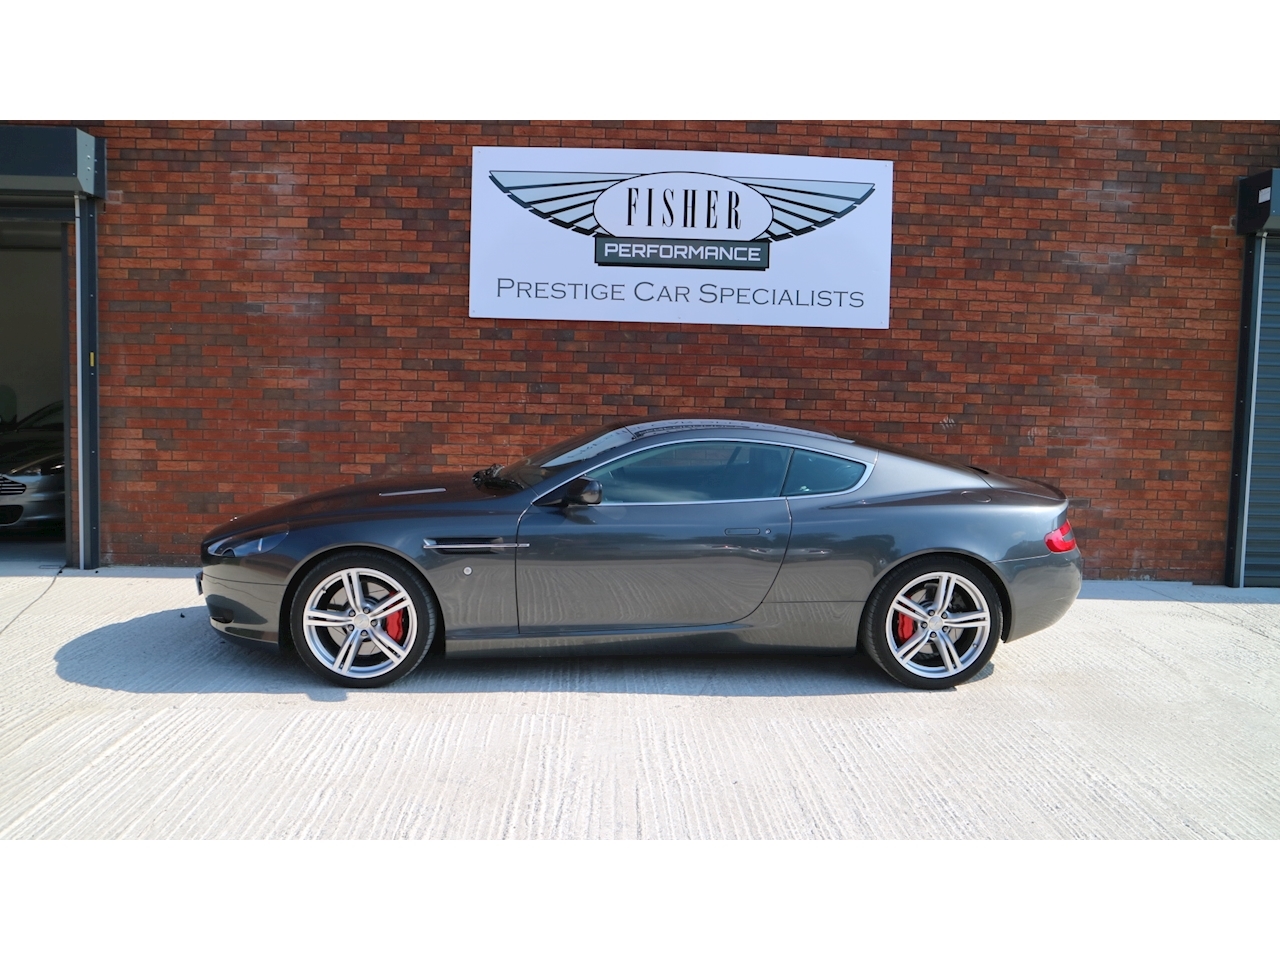 DB9 V12 5.9 2dr Coupe Automatic Petrol